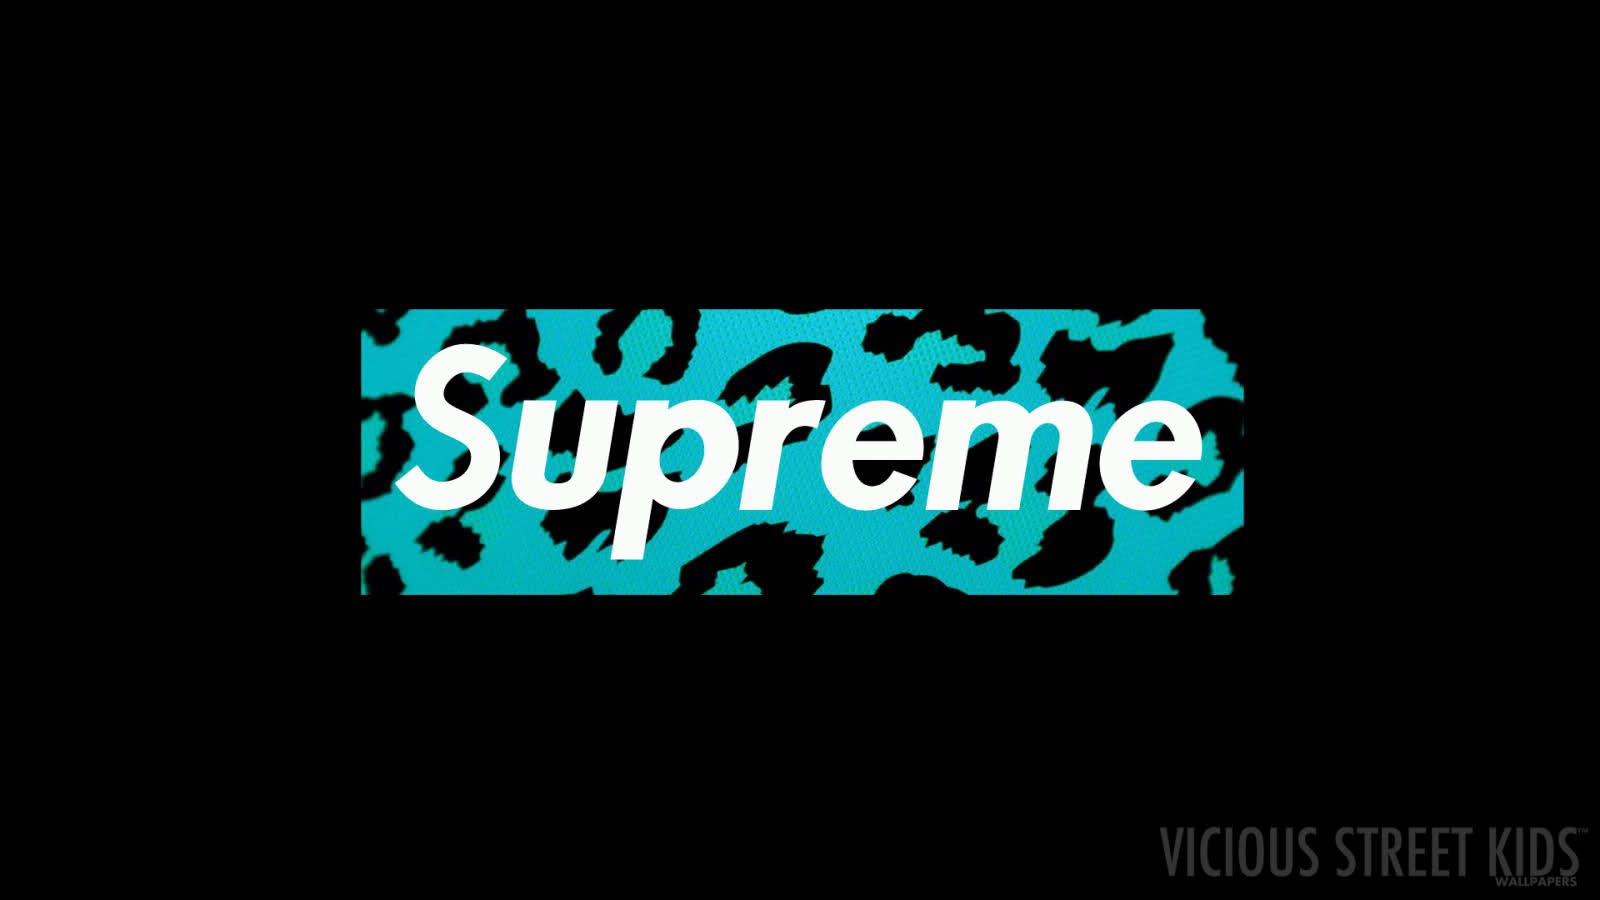 The Hundreds and Supreme Wallpaper. The Hundreds Wallpaper, Hundreds Brand Wallpaper and Hundreds Clothing Wallpaper